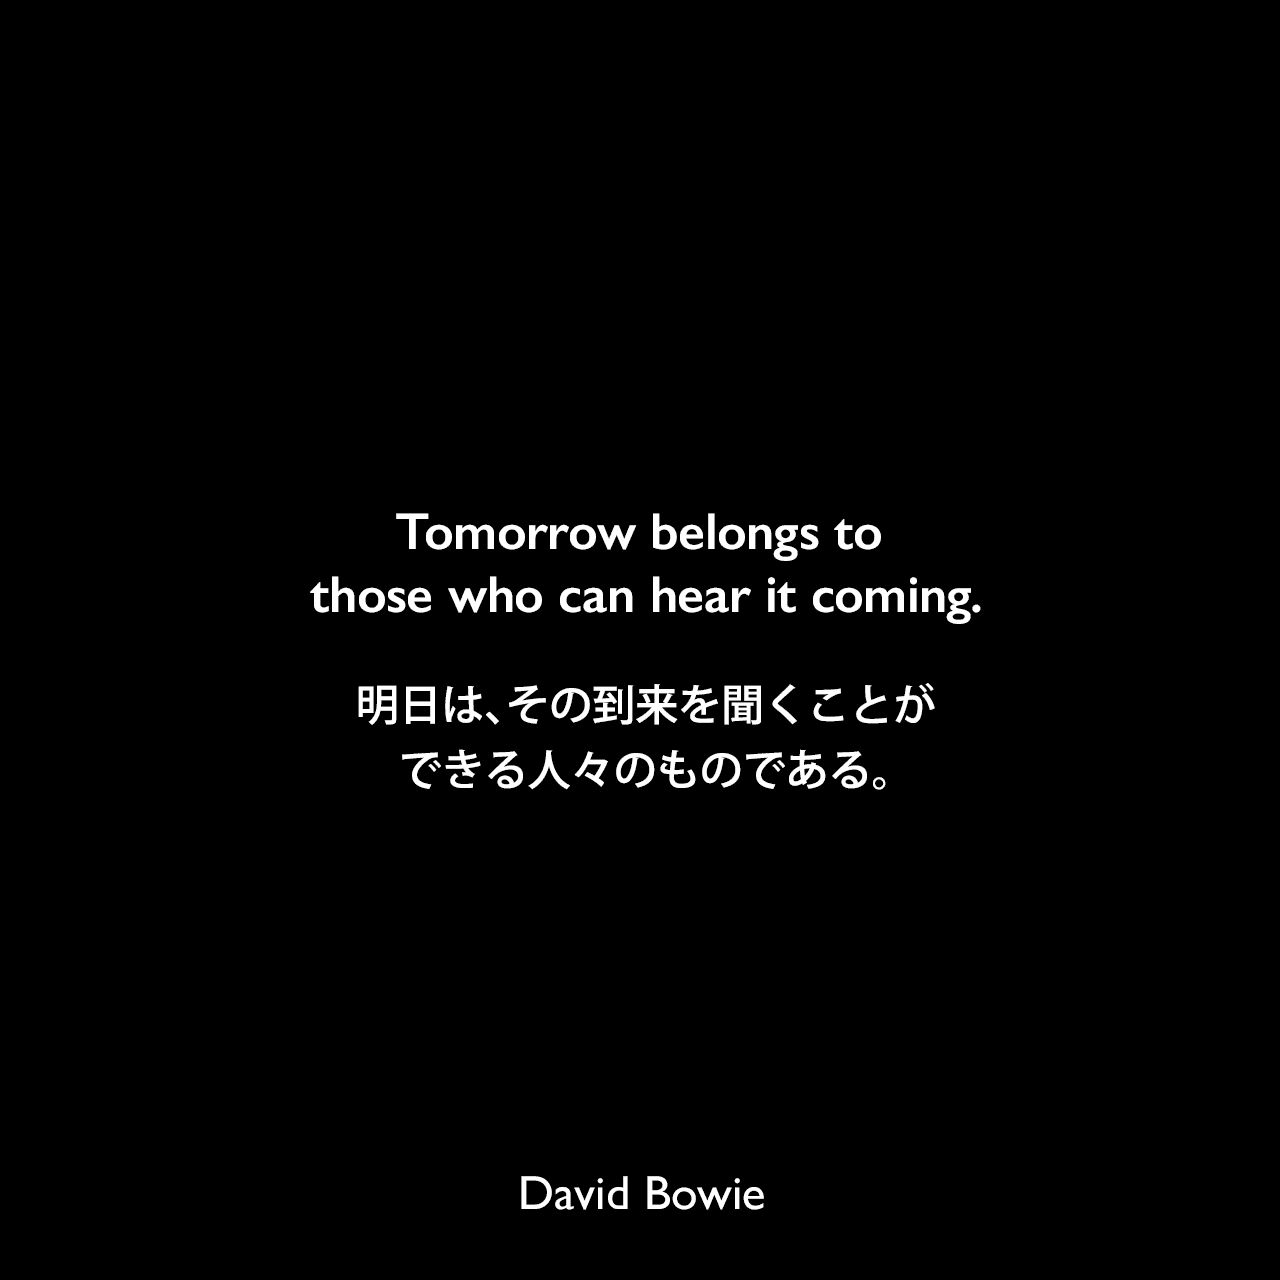 Tomorrow belongs to those who can hear it coming.明日は、その到来を聞くことができる人々のものである。David Bowie